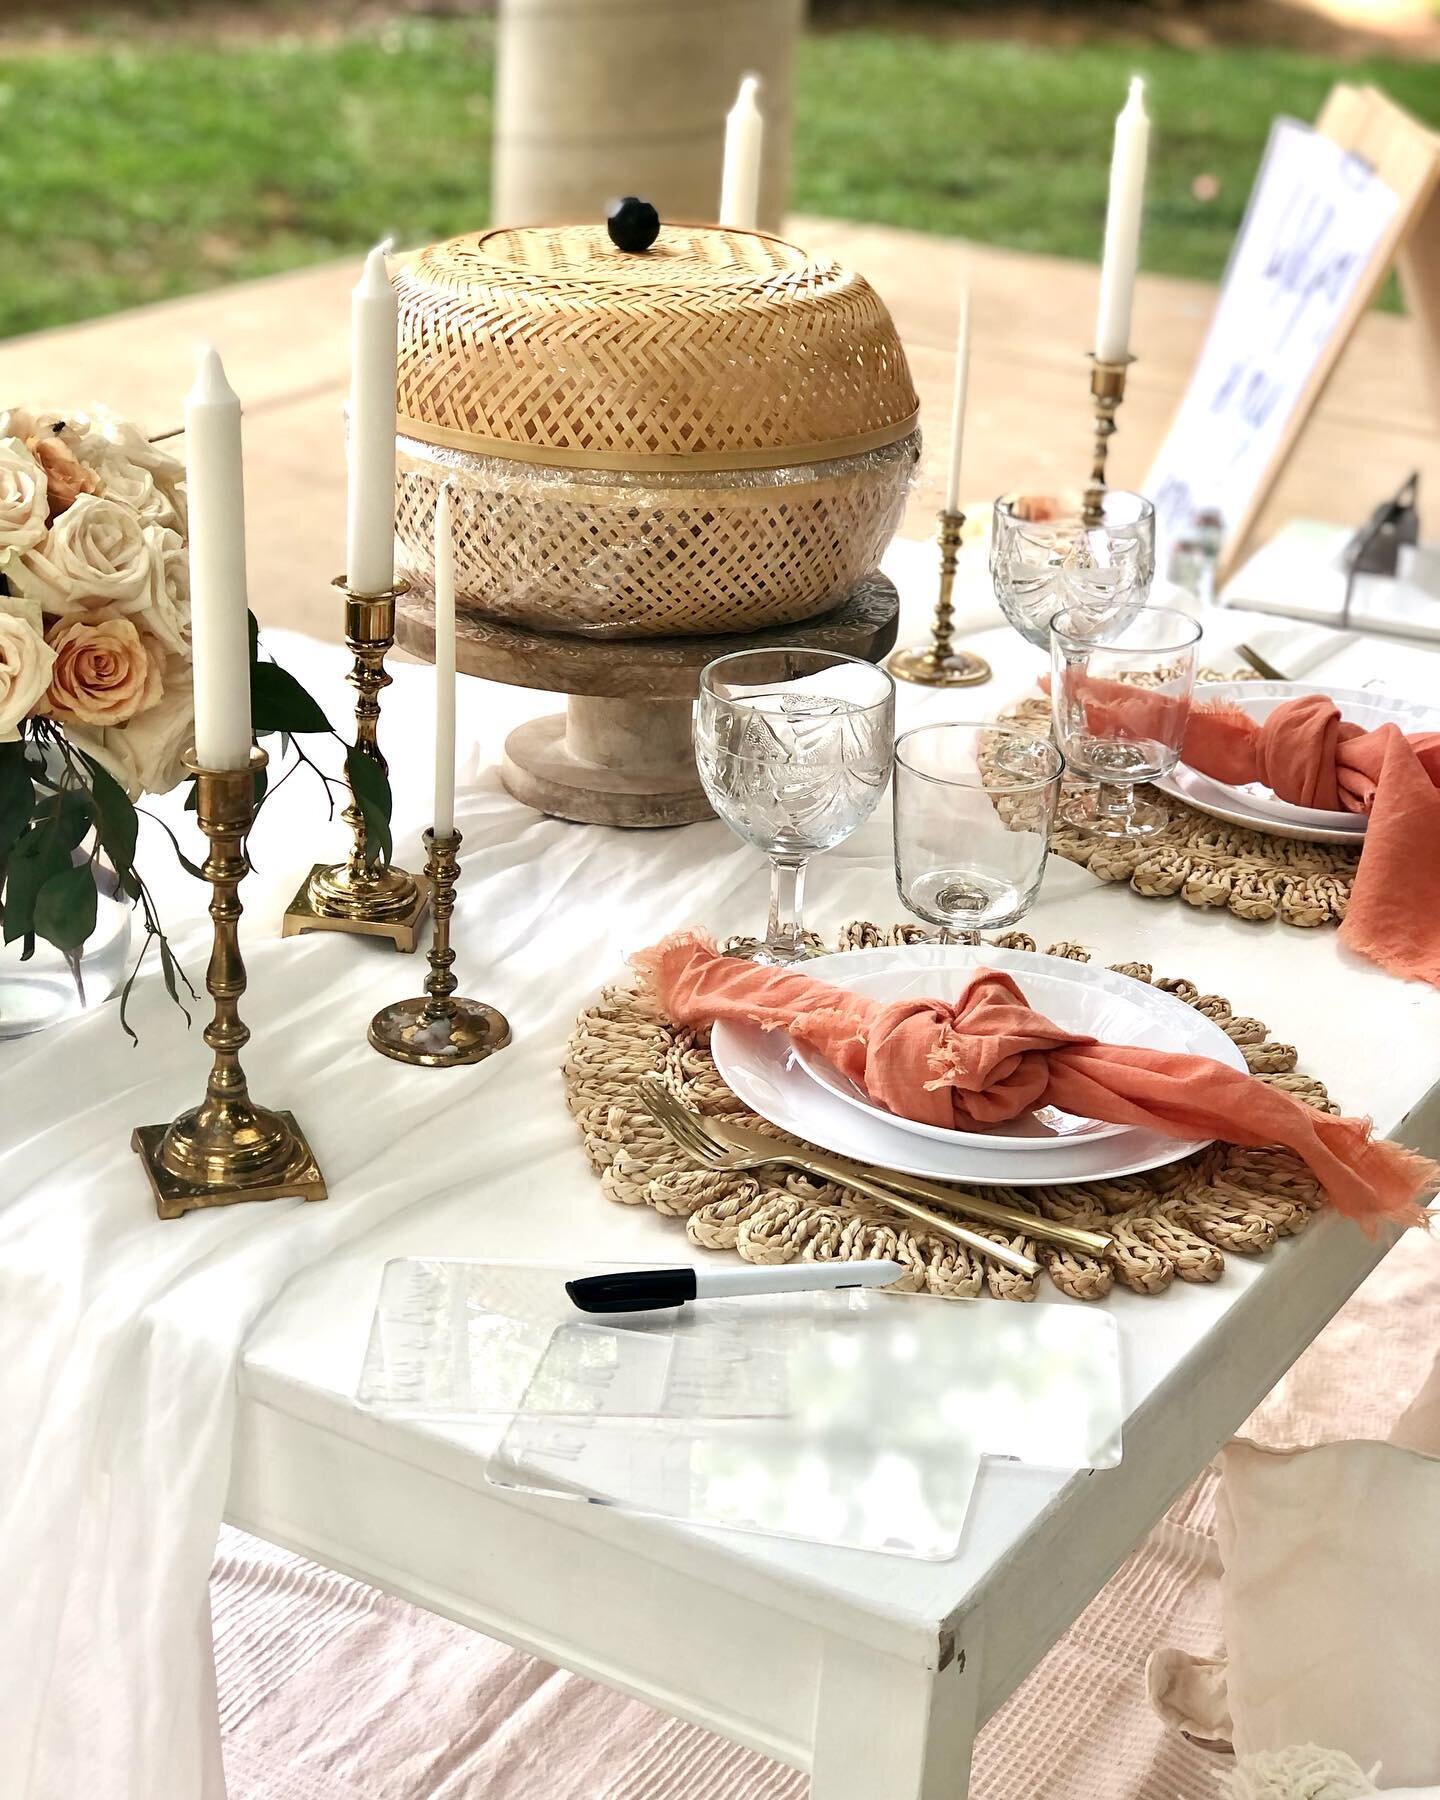 This was such a fun set up! We enjoyed being part of this sweet moment!💕💕
.
.
.
.
.

#thegatheringpicnicco&nbsp;#clt&nbsp;#cltpicnic&nbsp;#cltpicnics&nbsp;#charlottedate&nbsp;#charlottedatenight&nbsp;#charlottepicnic&nbsp;#charlottepicnics&nbsp;#ch